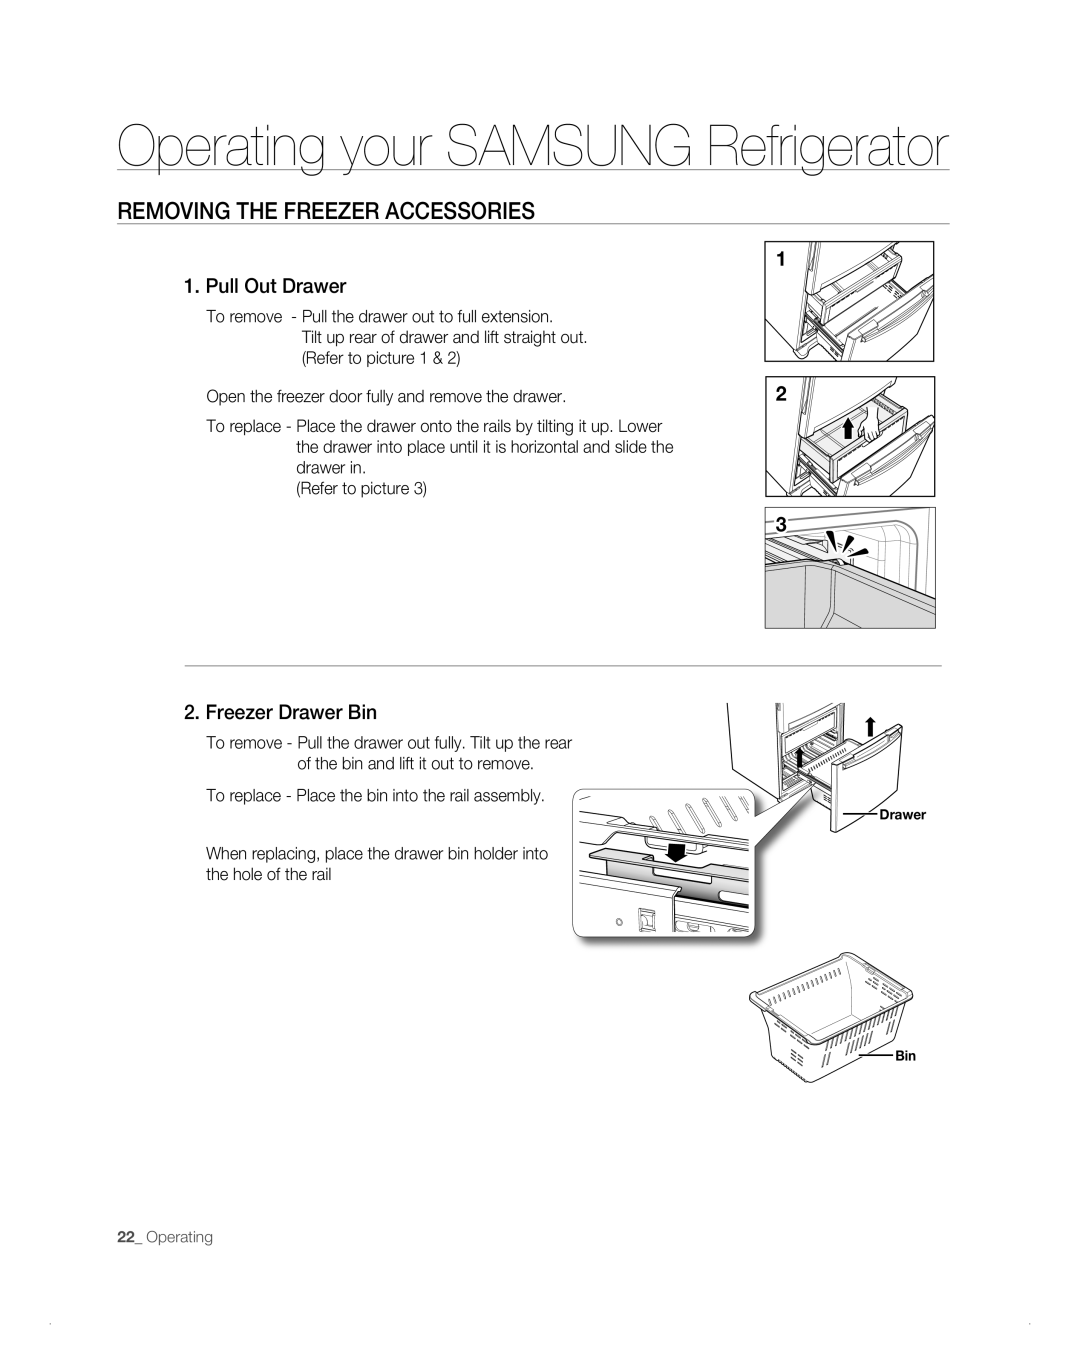 Samsung RB1AB Removing The Freezer Accessories, Operating your SAMSUNG Refrigerator, Pull Out Drawer, Freezer Drawer Bin 